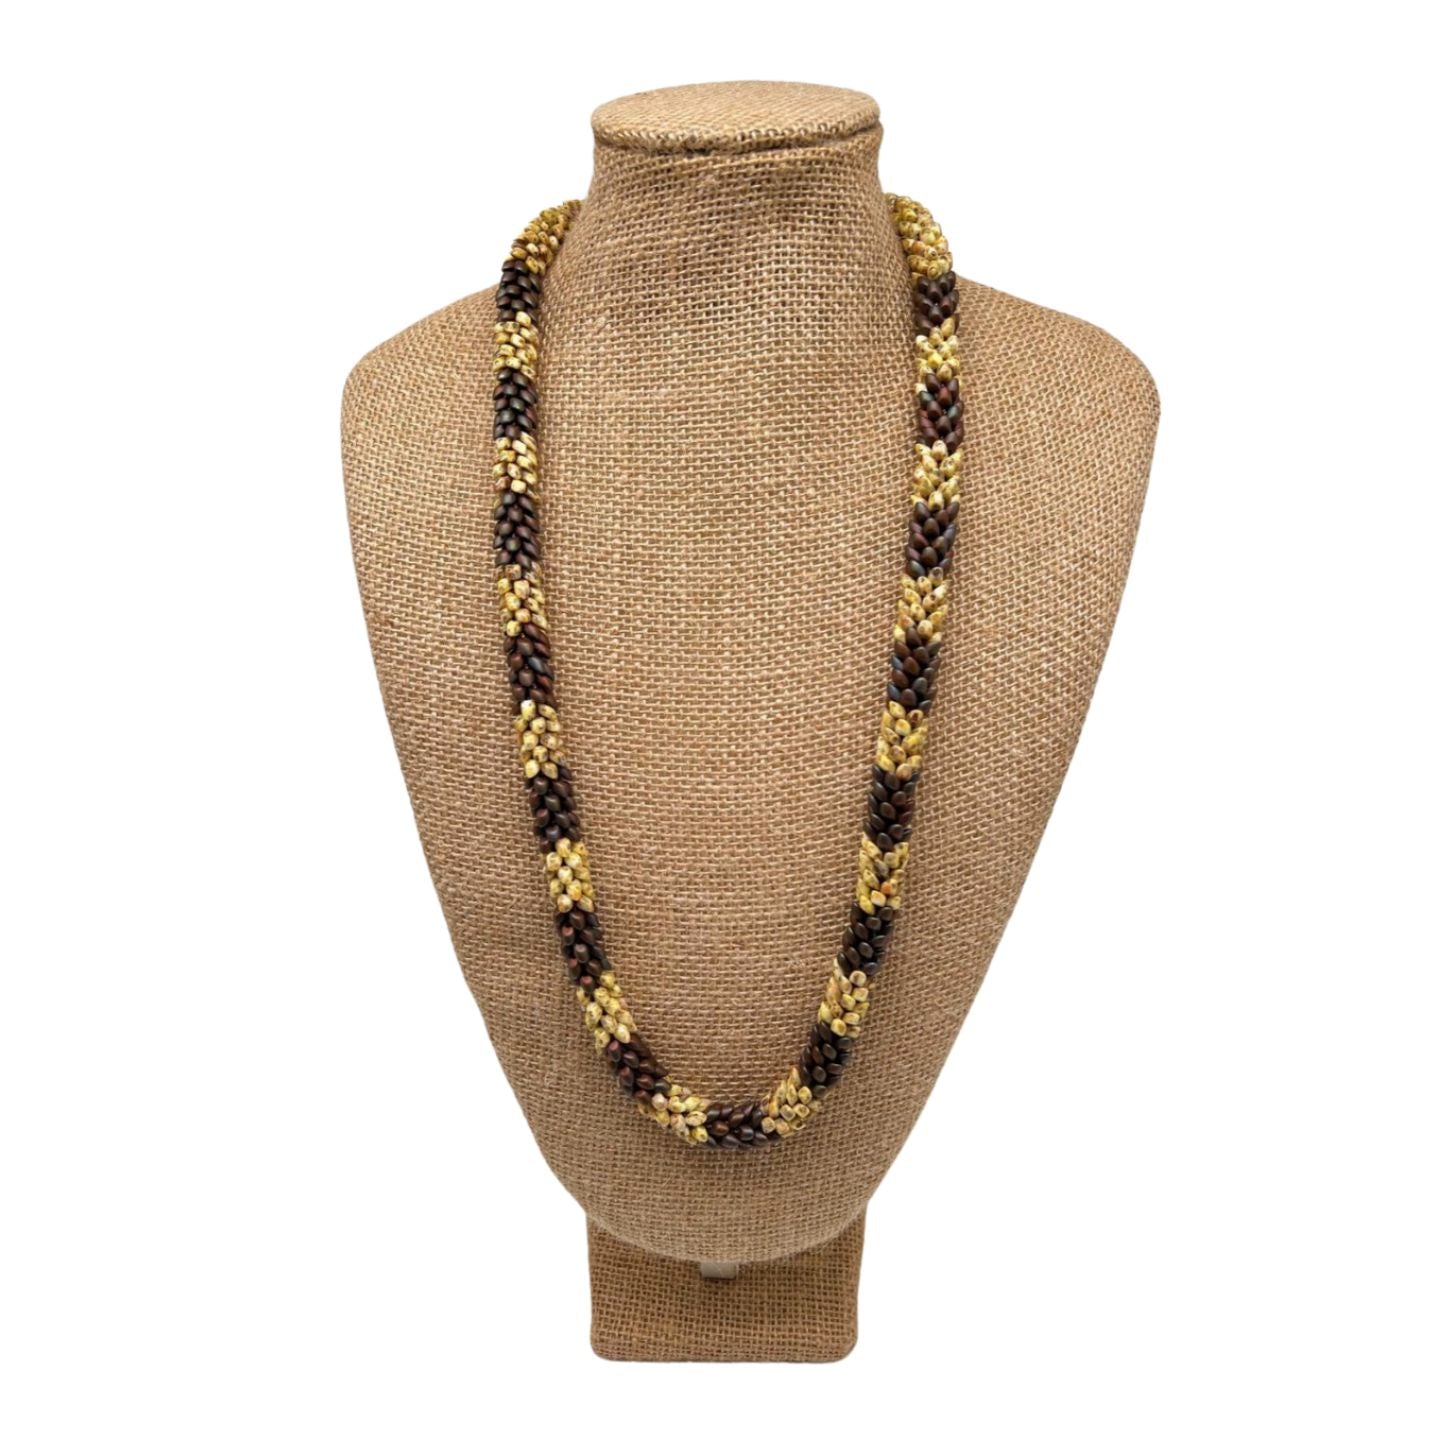 Pop-Up Mākeke - Akalei Designs - Picasso Yellow and Metallic Brown Dragon Scales Necklace  - 29in-30in - Front View